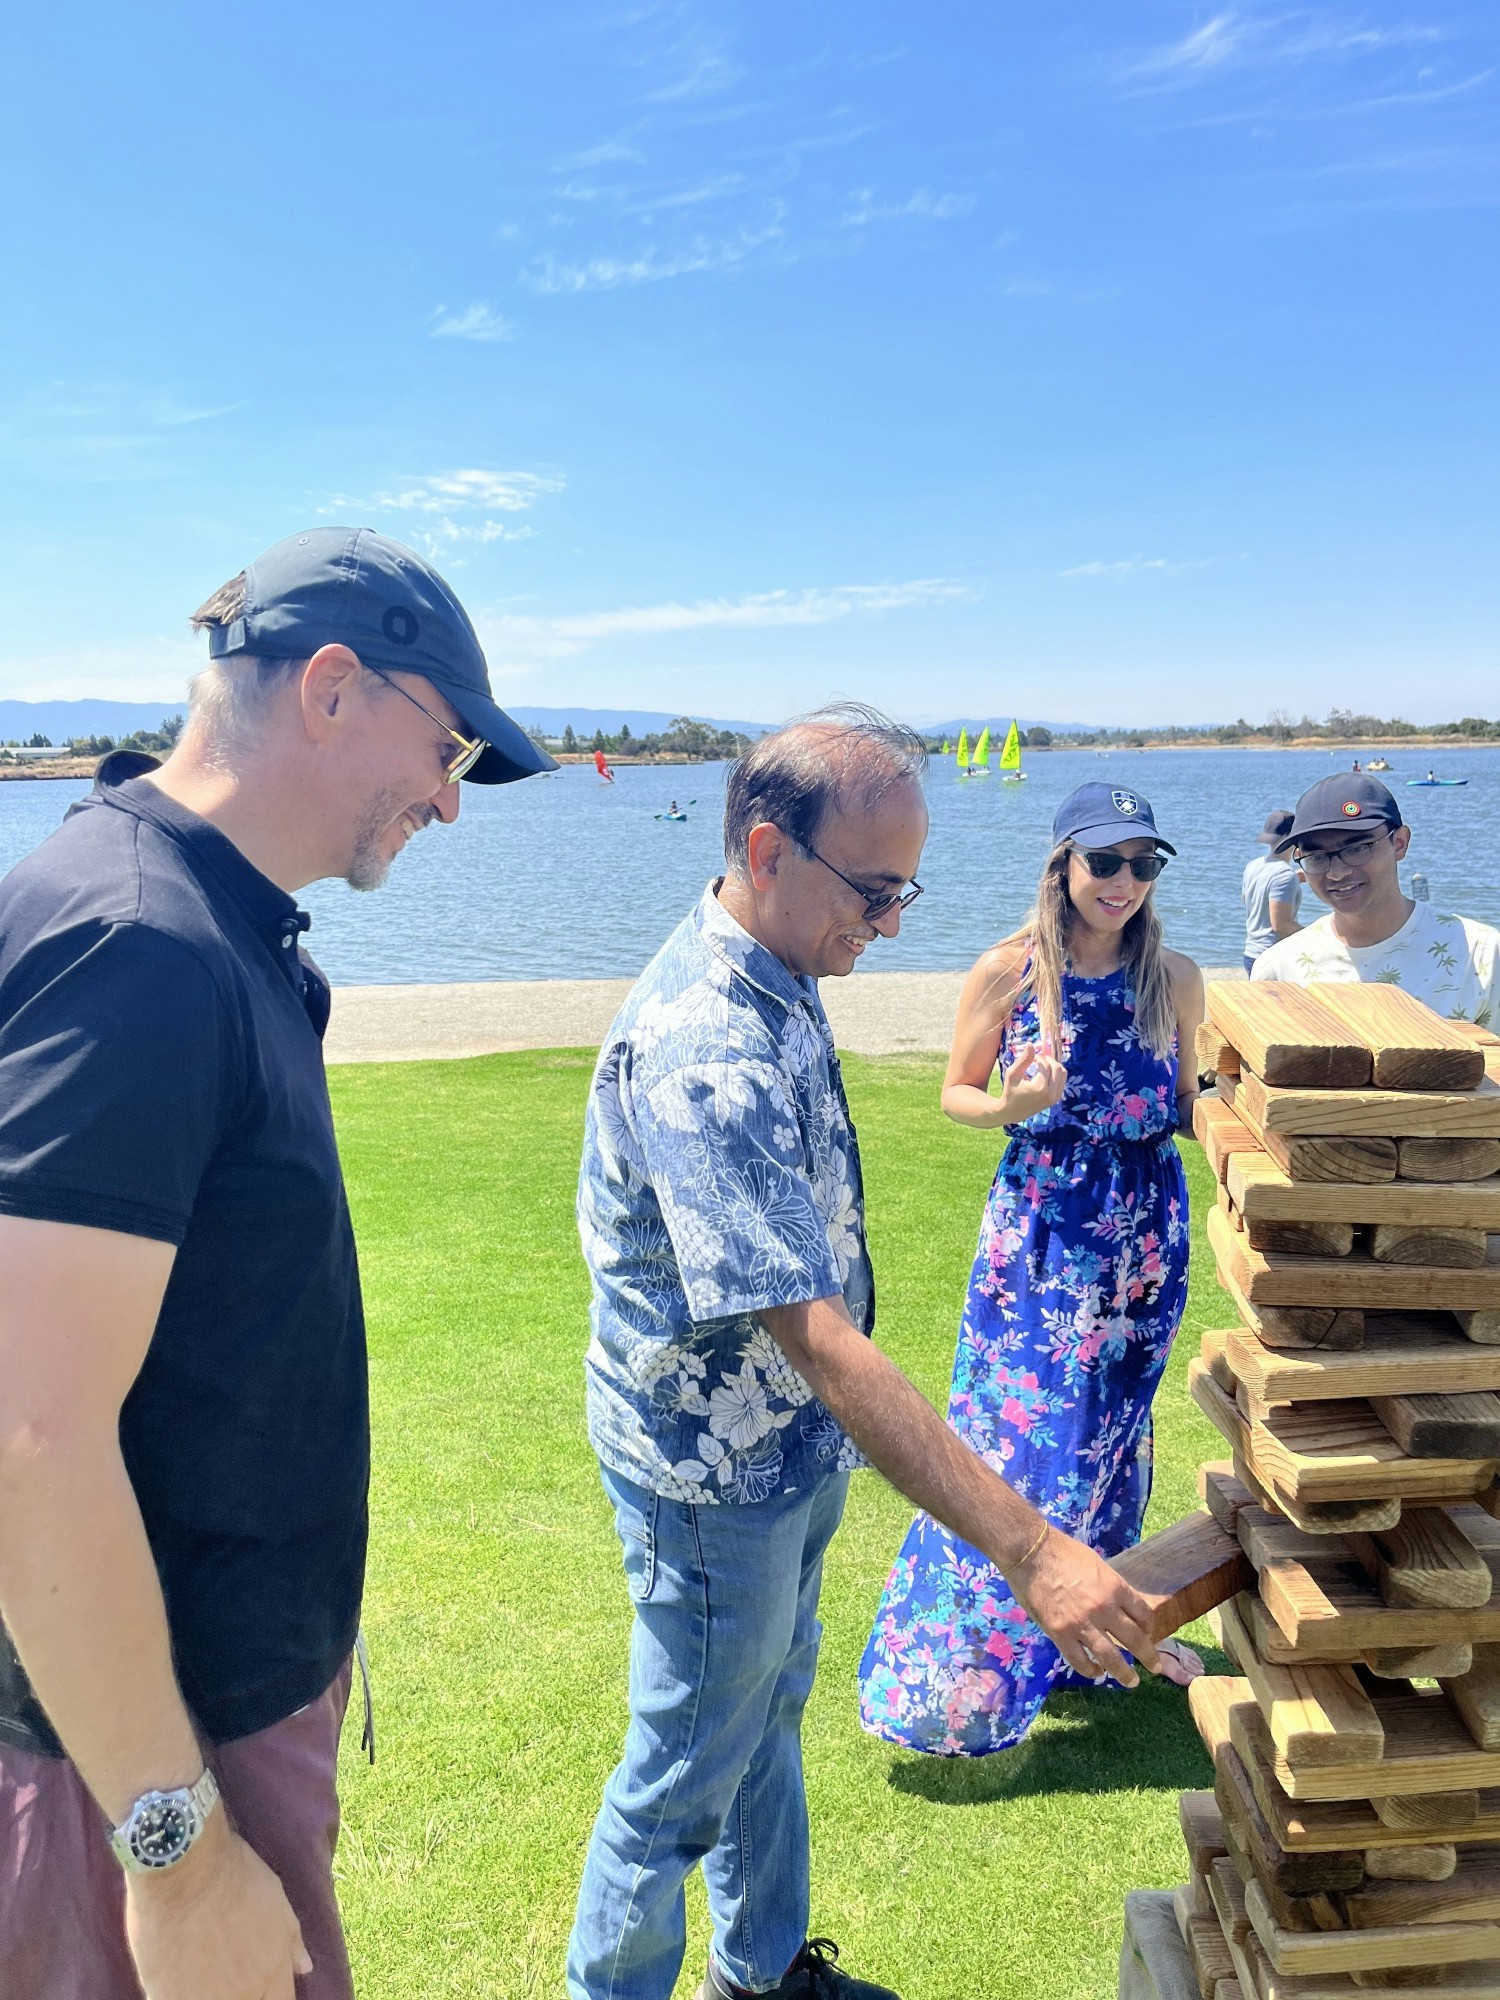 Our Co-founders Erik and Ajay got creative with the giant Jenga at our company picnic.